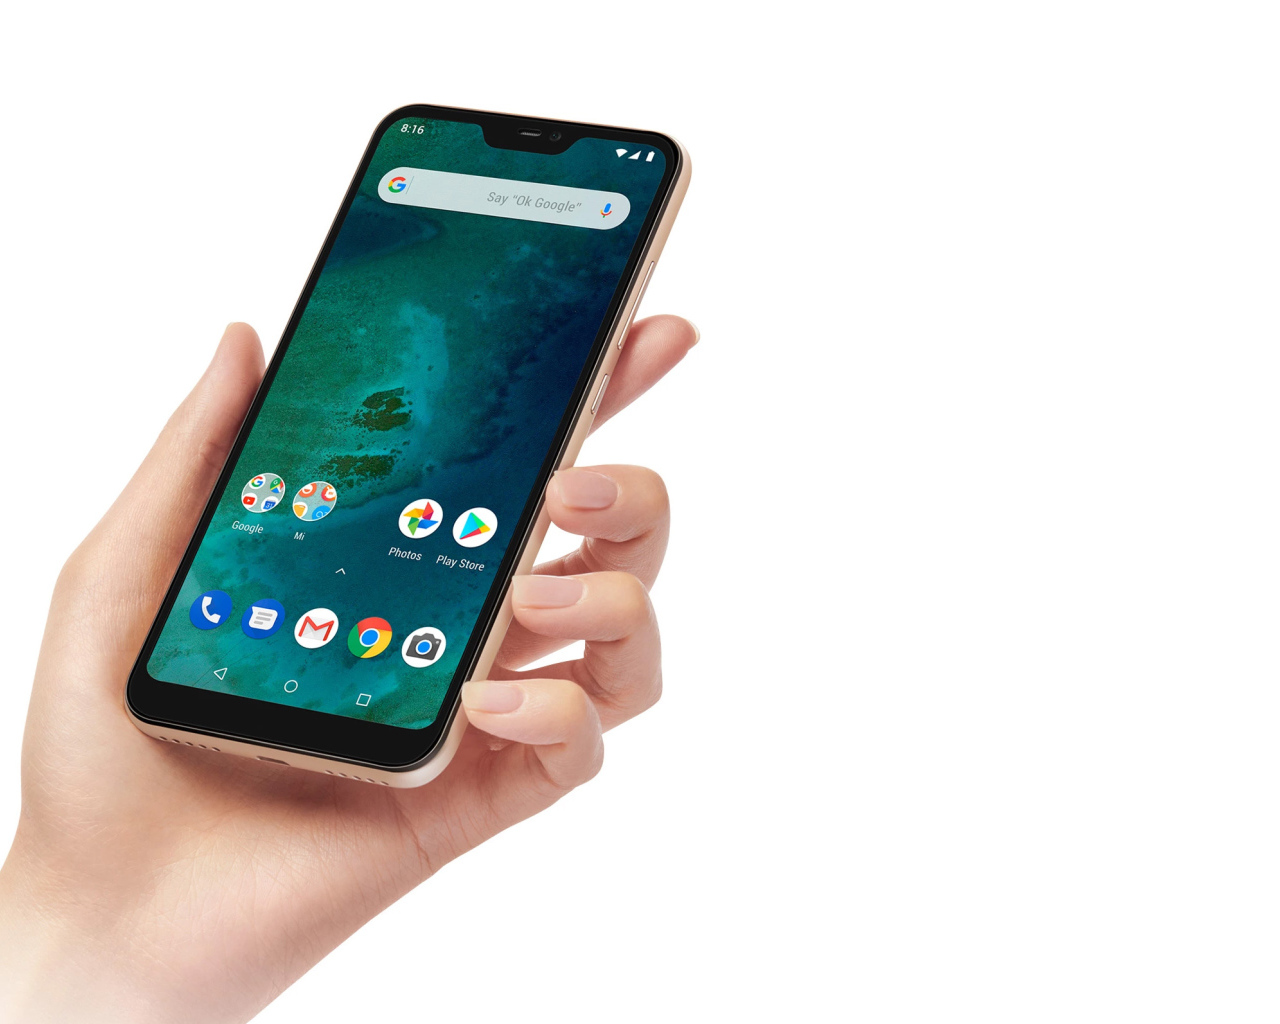 The new smartphone Xiaomi Mi A2, 2019 in hand on a white background